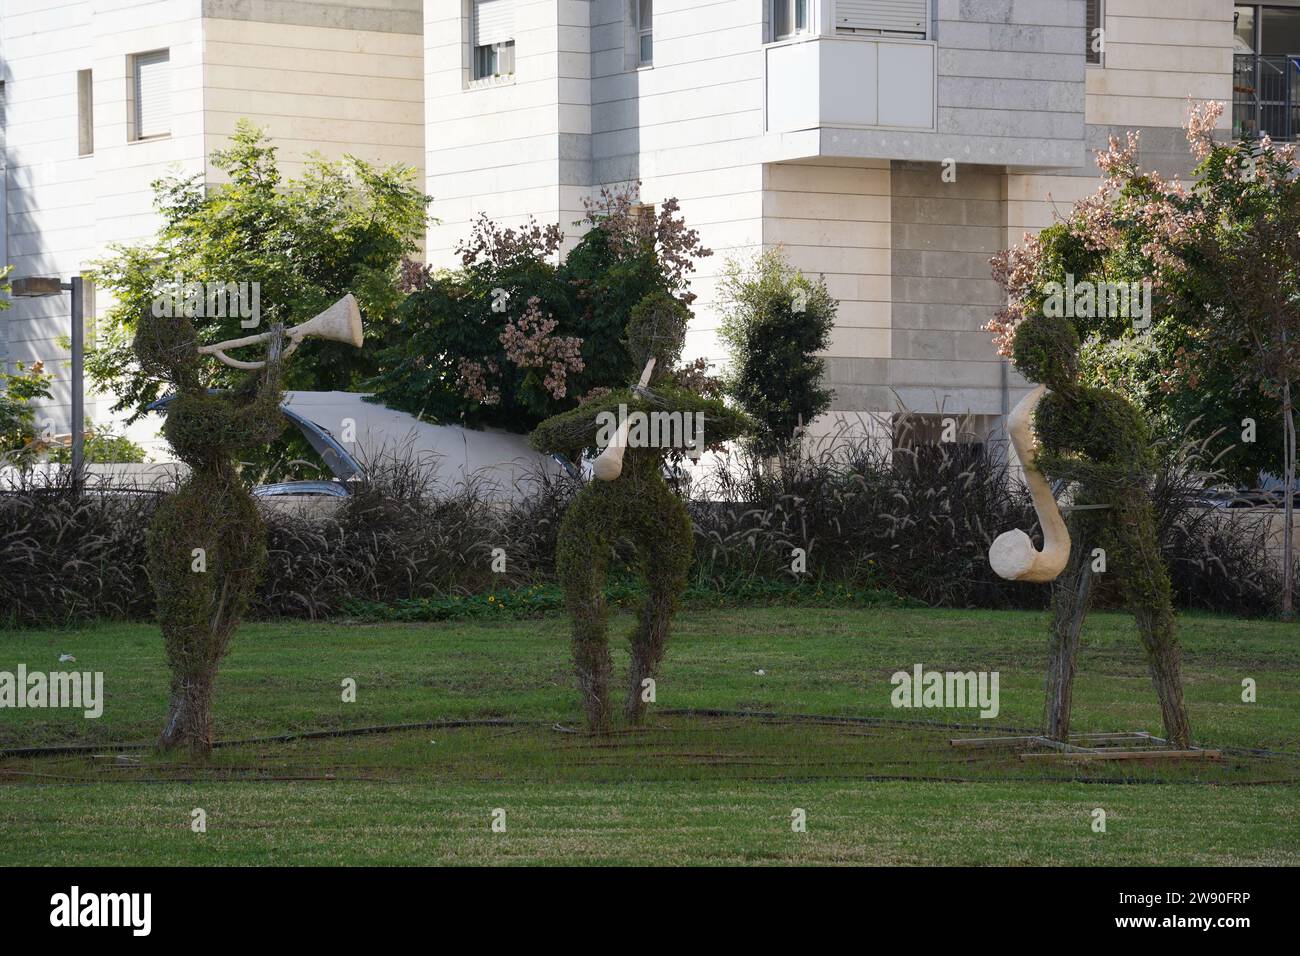 Topiary sculpture of musicians with with music instruments made of grass. Urban design, city architecture, park decoration. Stock Photo